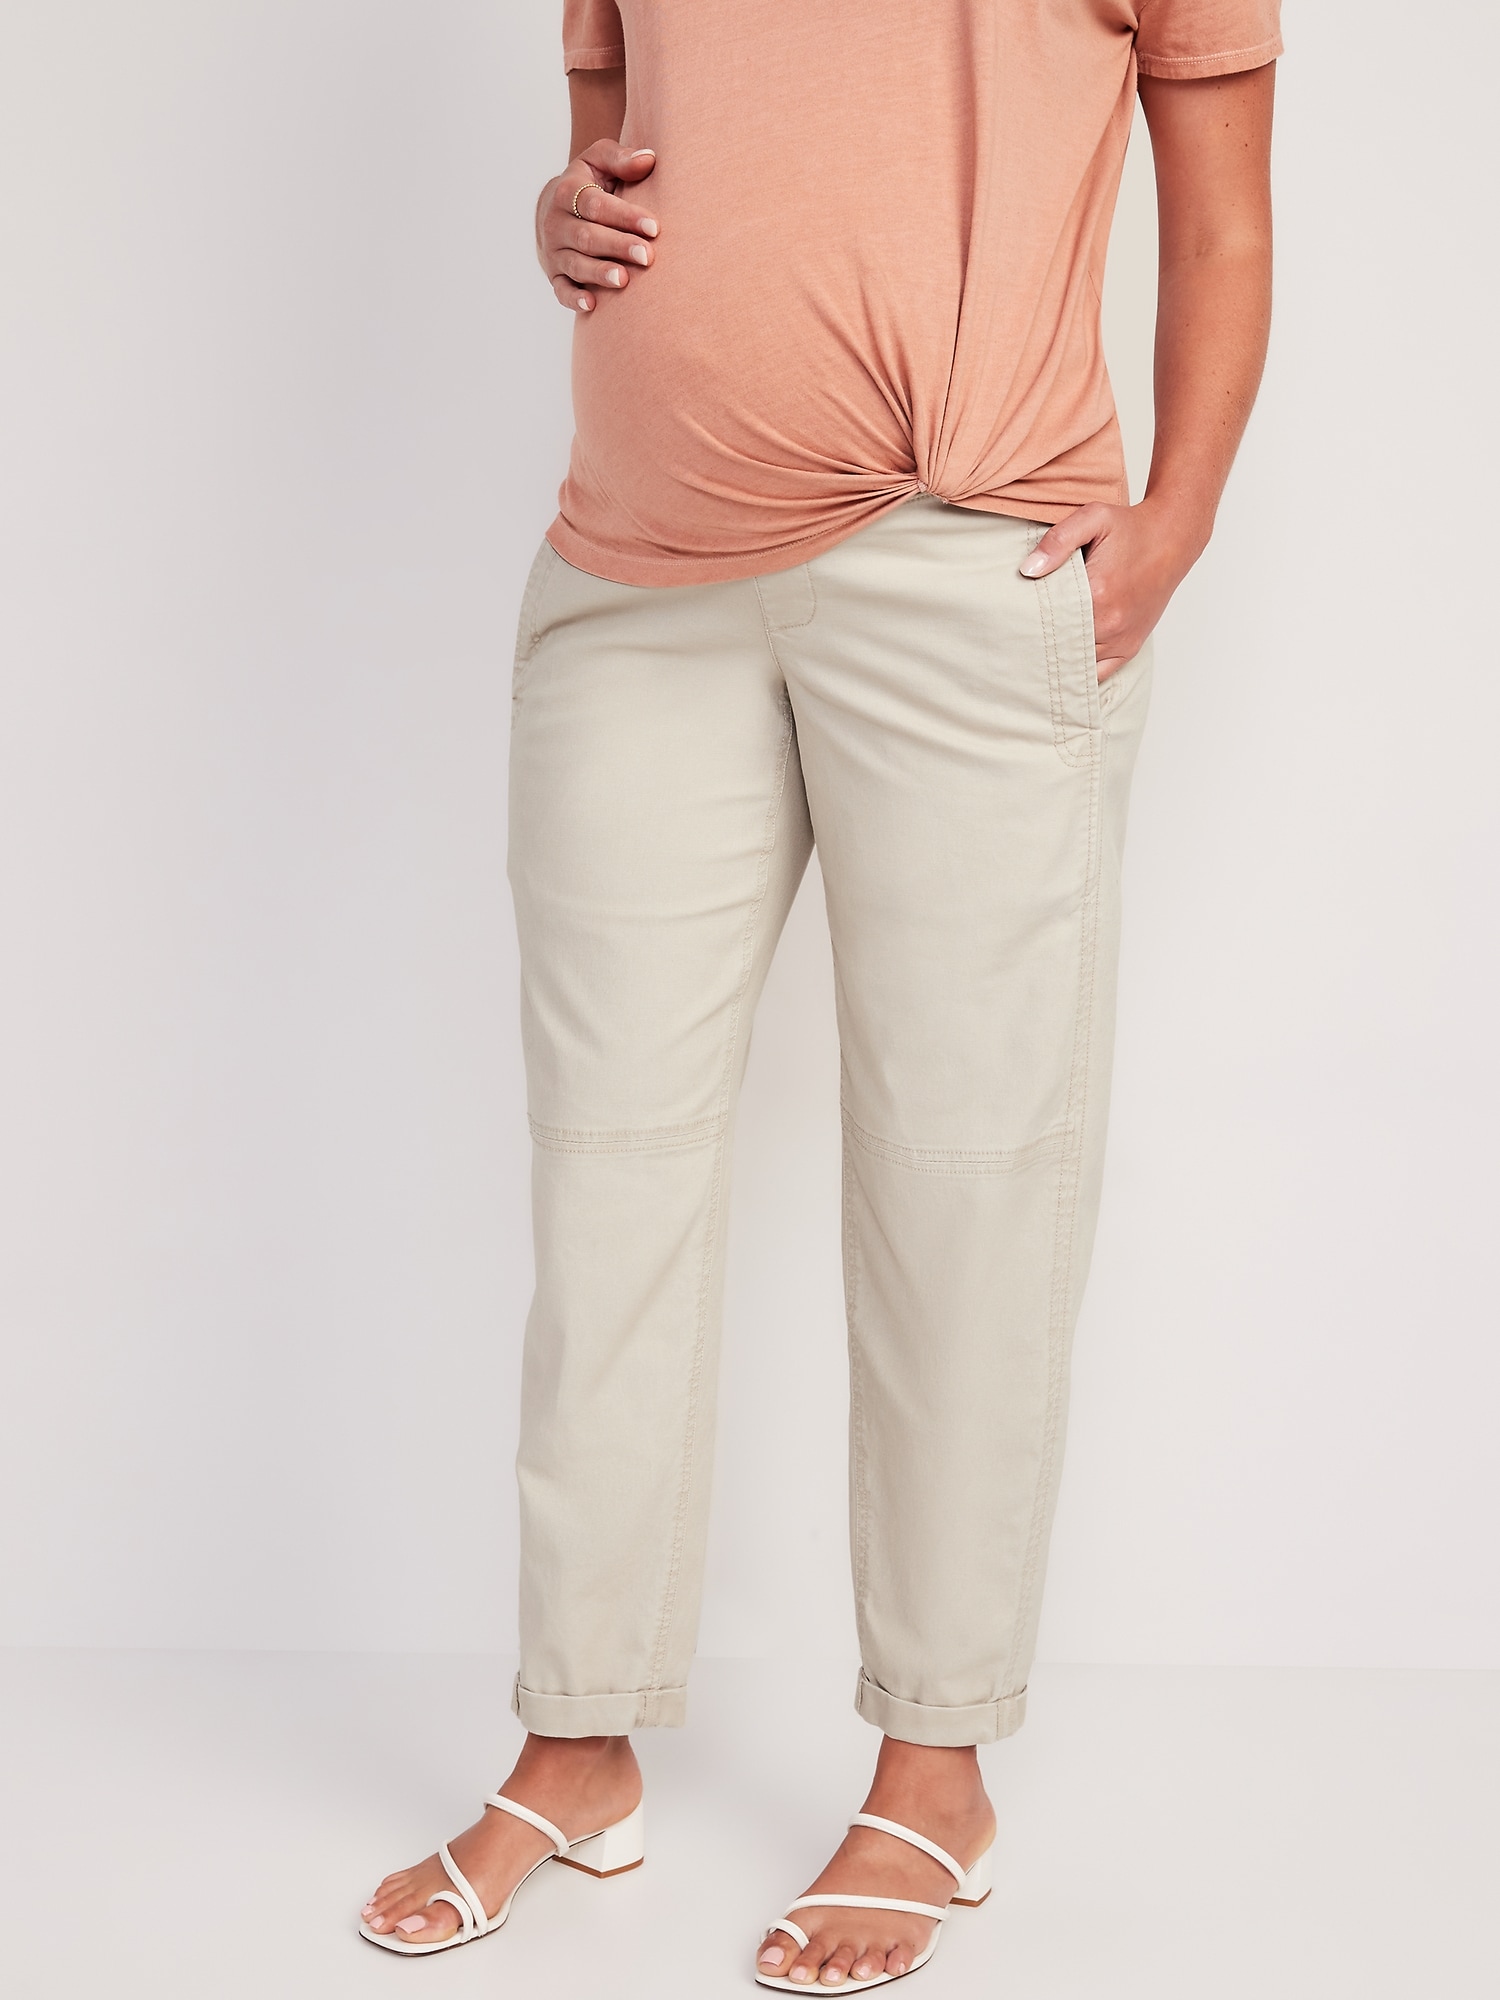 Maternity Rollover-Waist Workwear Pants Old Navy, 54% OFF